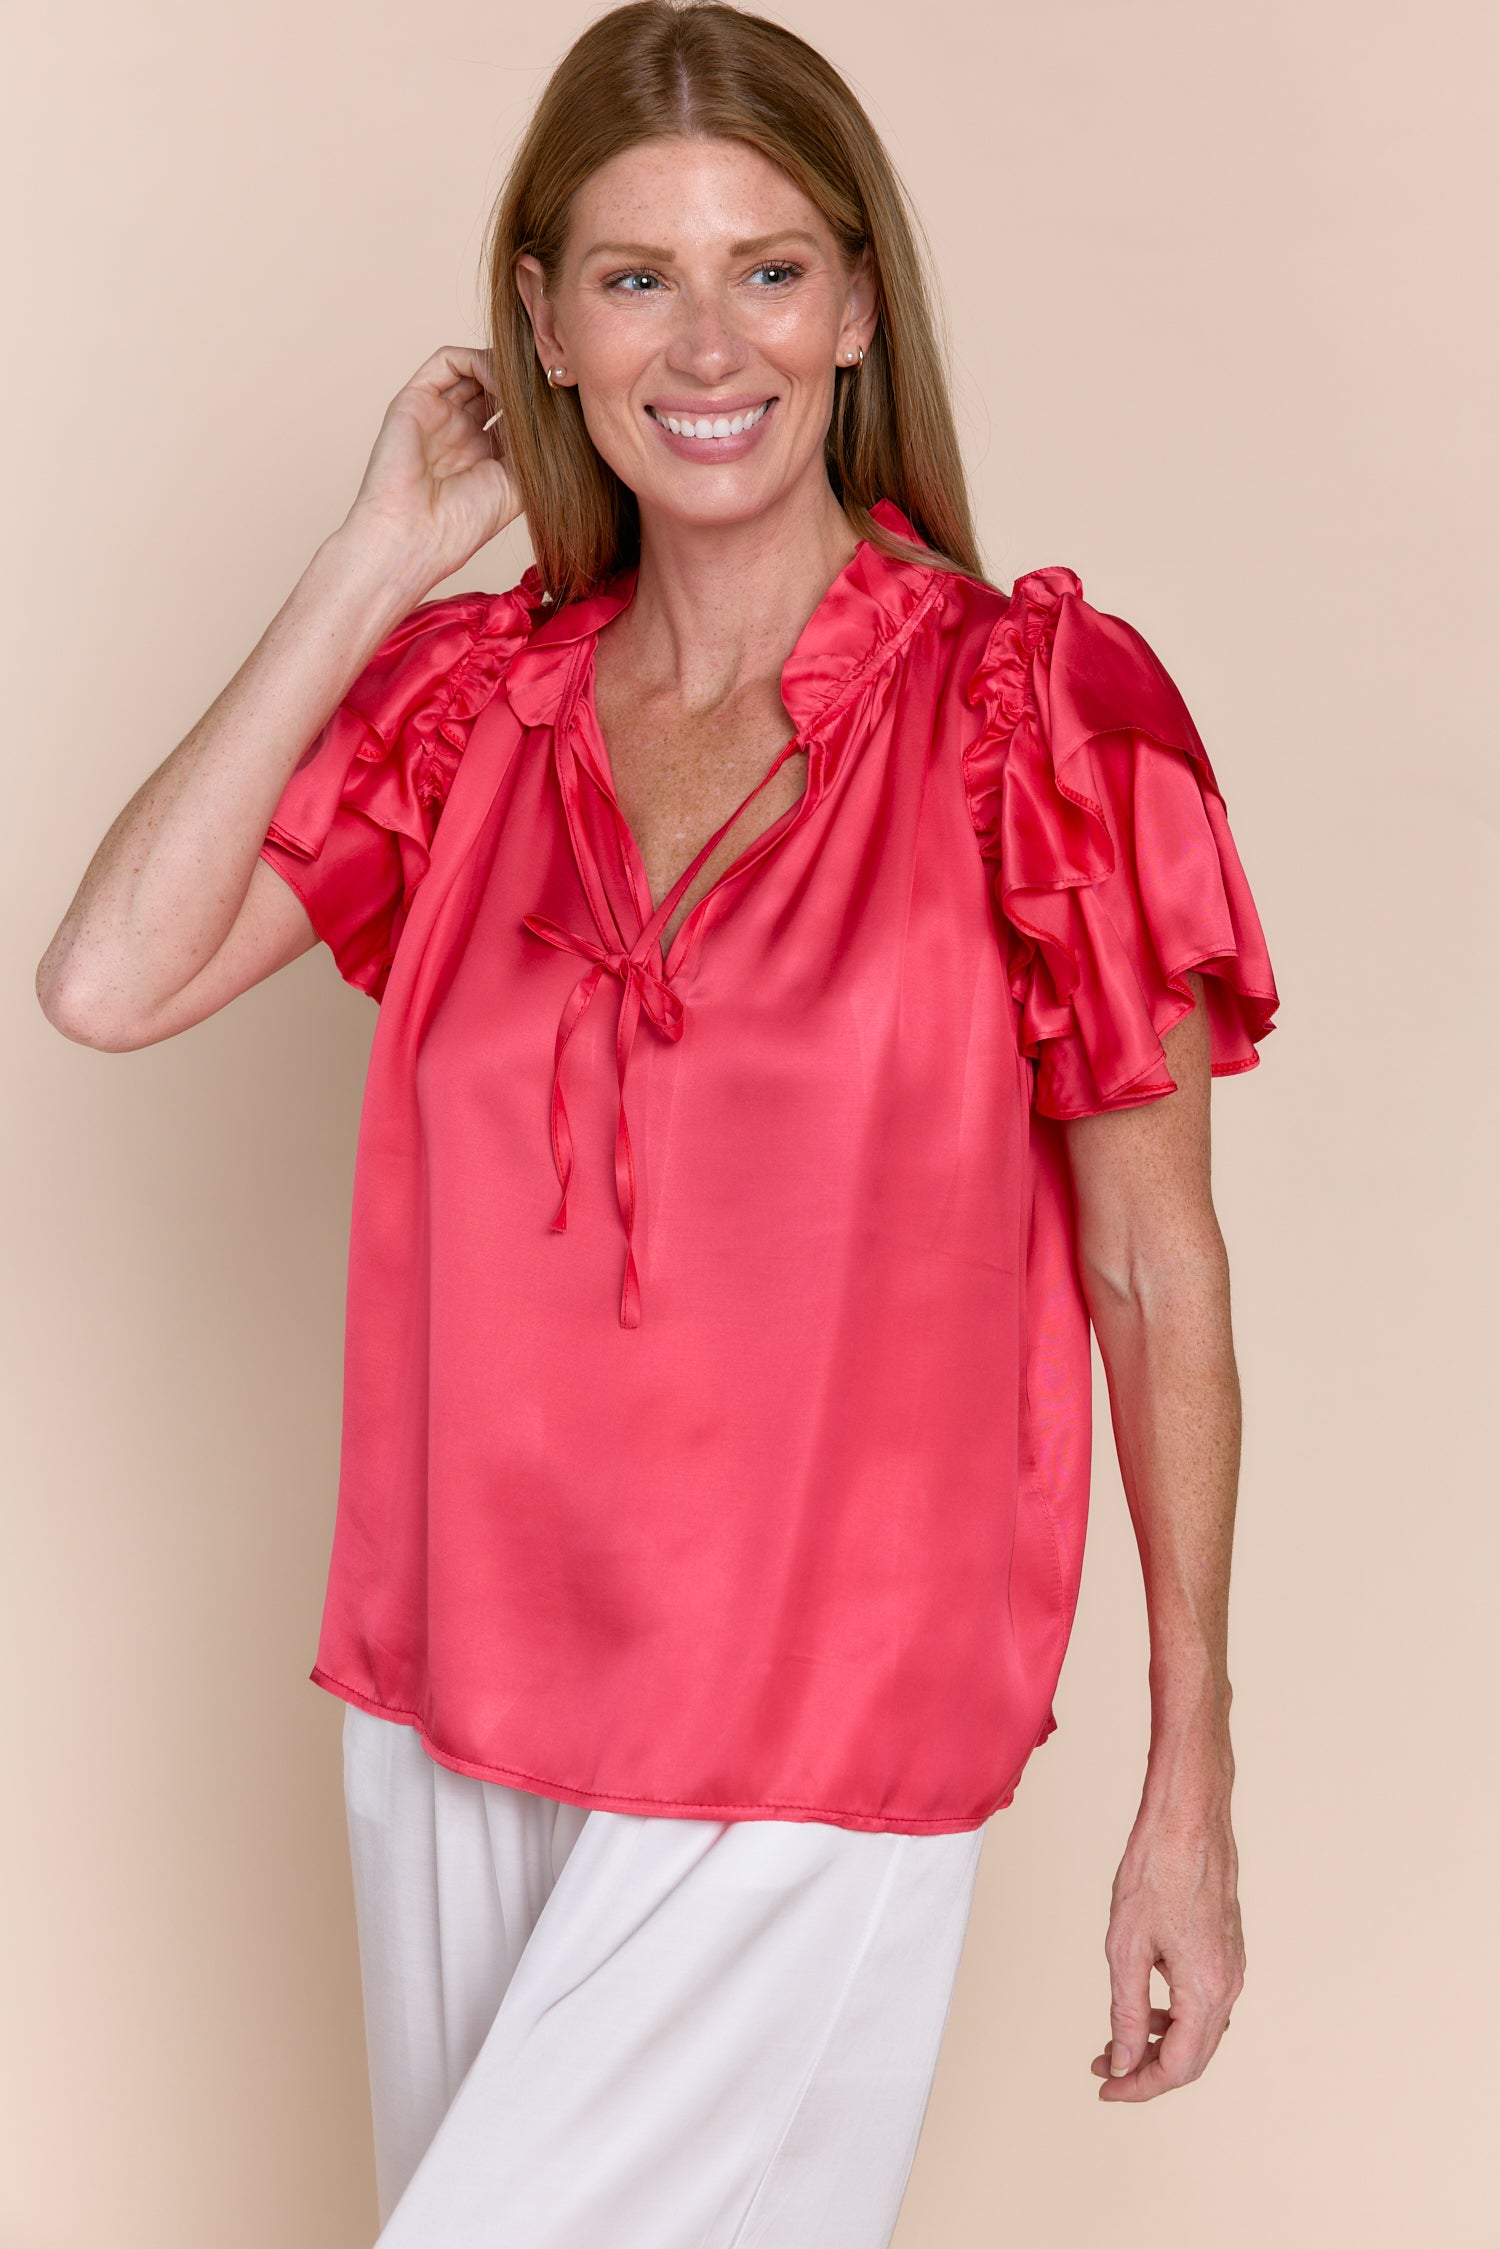 CALI | Tops | Blouse, Satin, Satin and Silk Tops, SOLIDS, SS23, Tops | shop-sofia